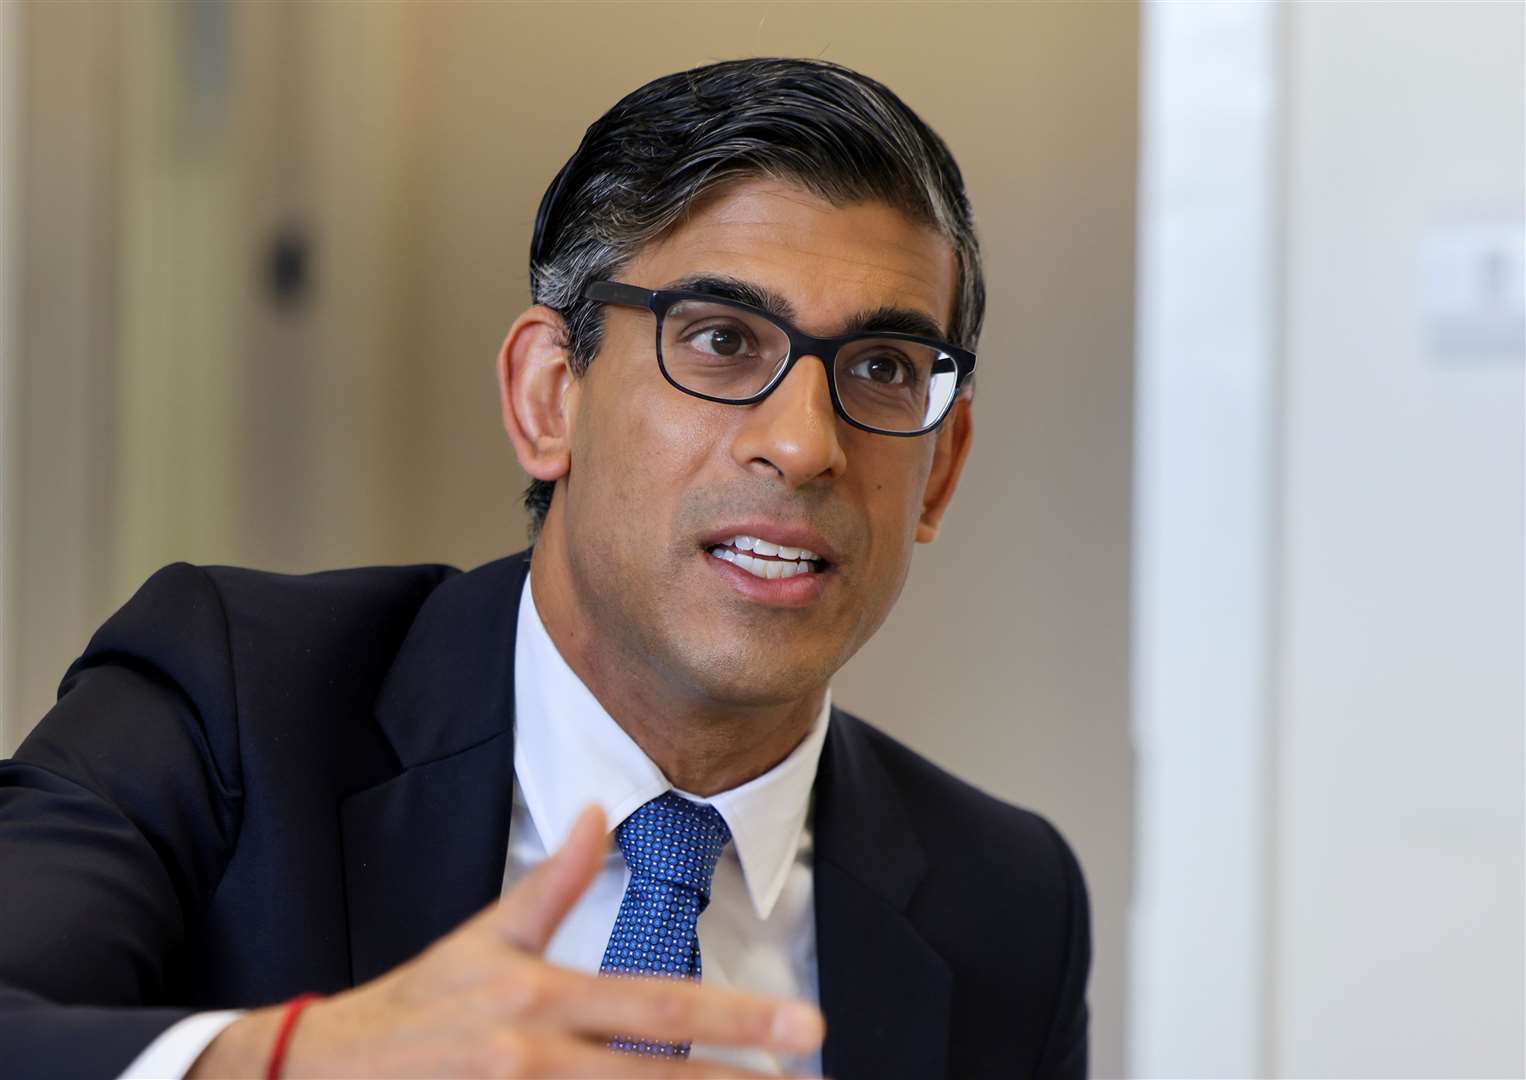 Rishi Sunak insisted he has “turned the corner” to put the country on a better path